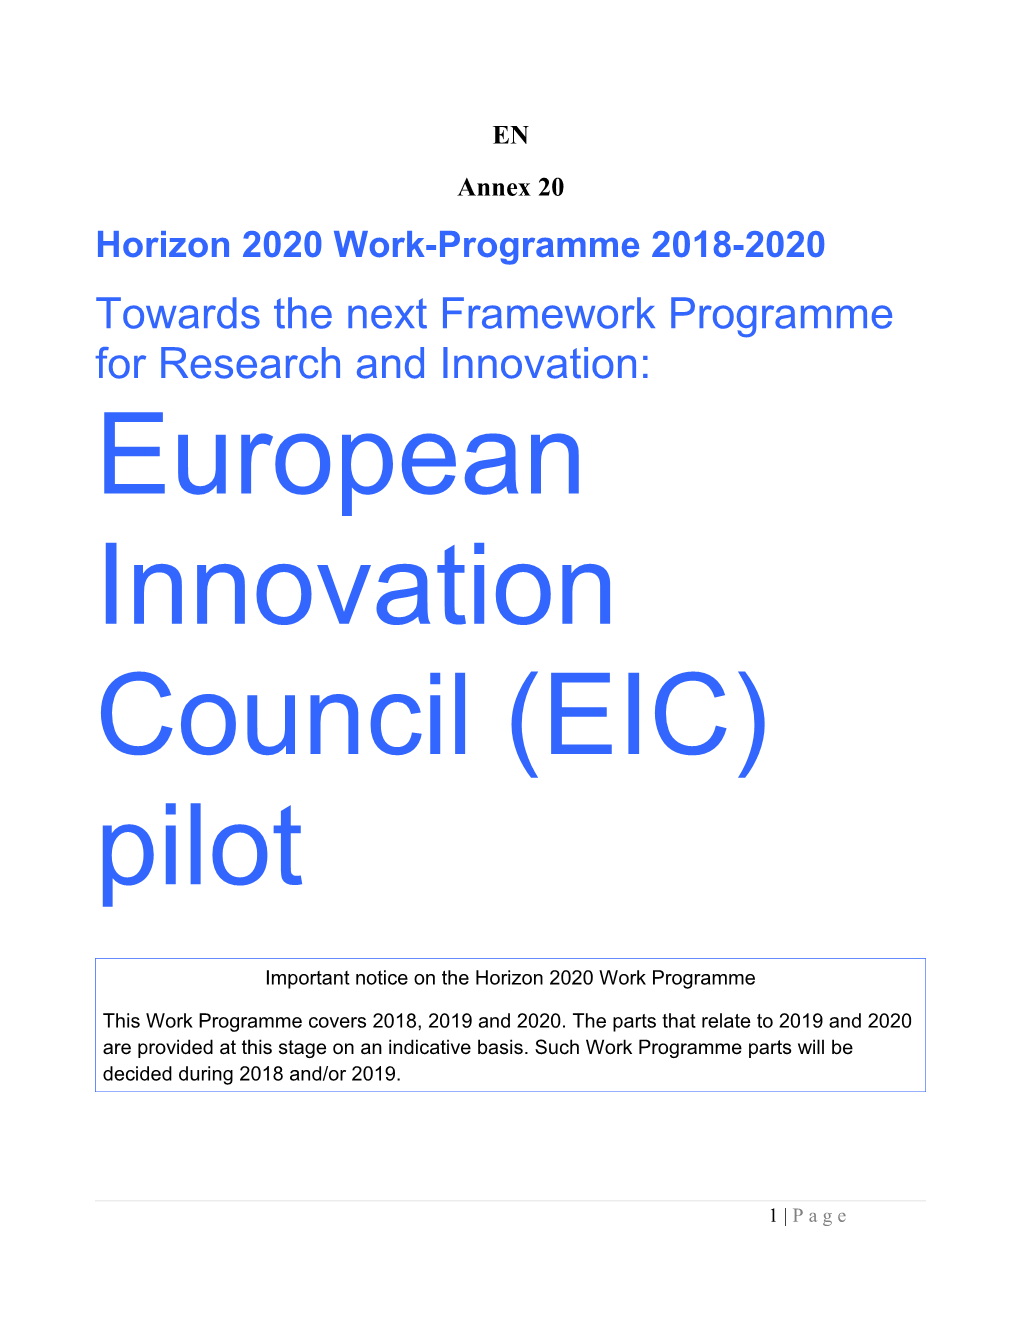 Draft WP 2018-2020 for 'Preparatory Phase of a Potential European Innovation Council (EIC)'